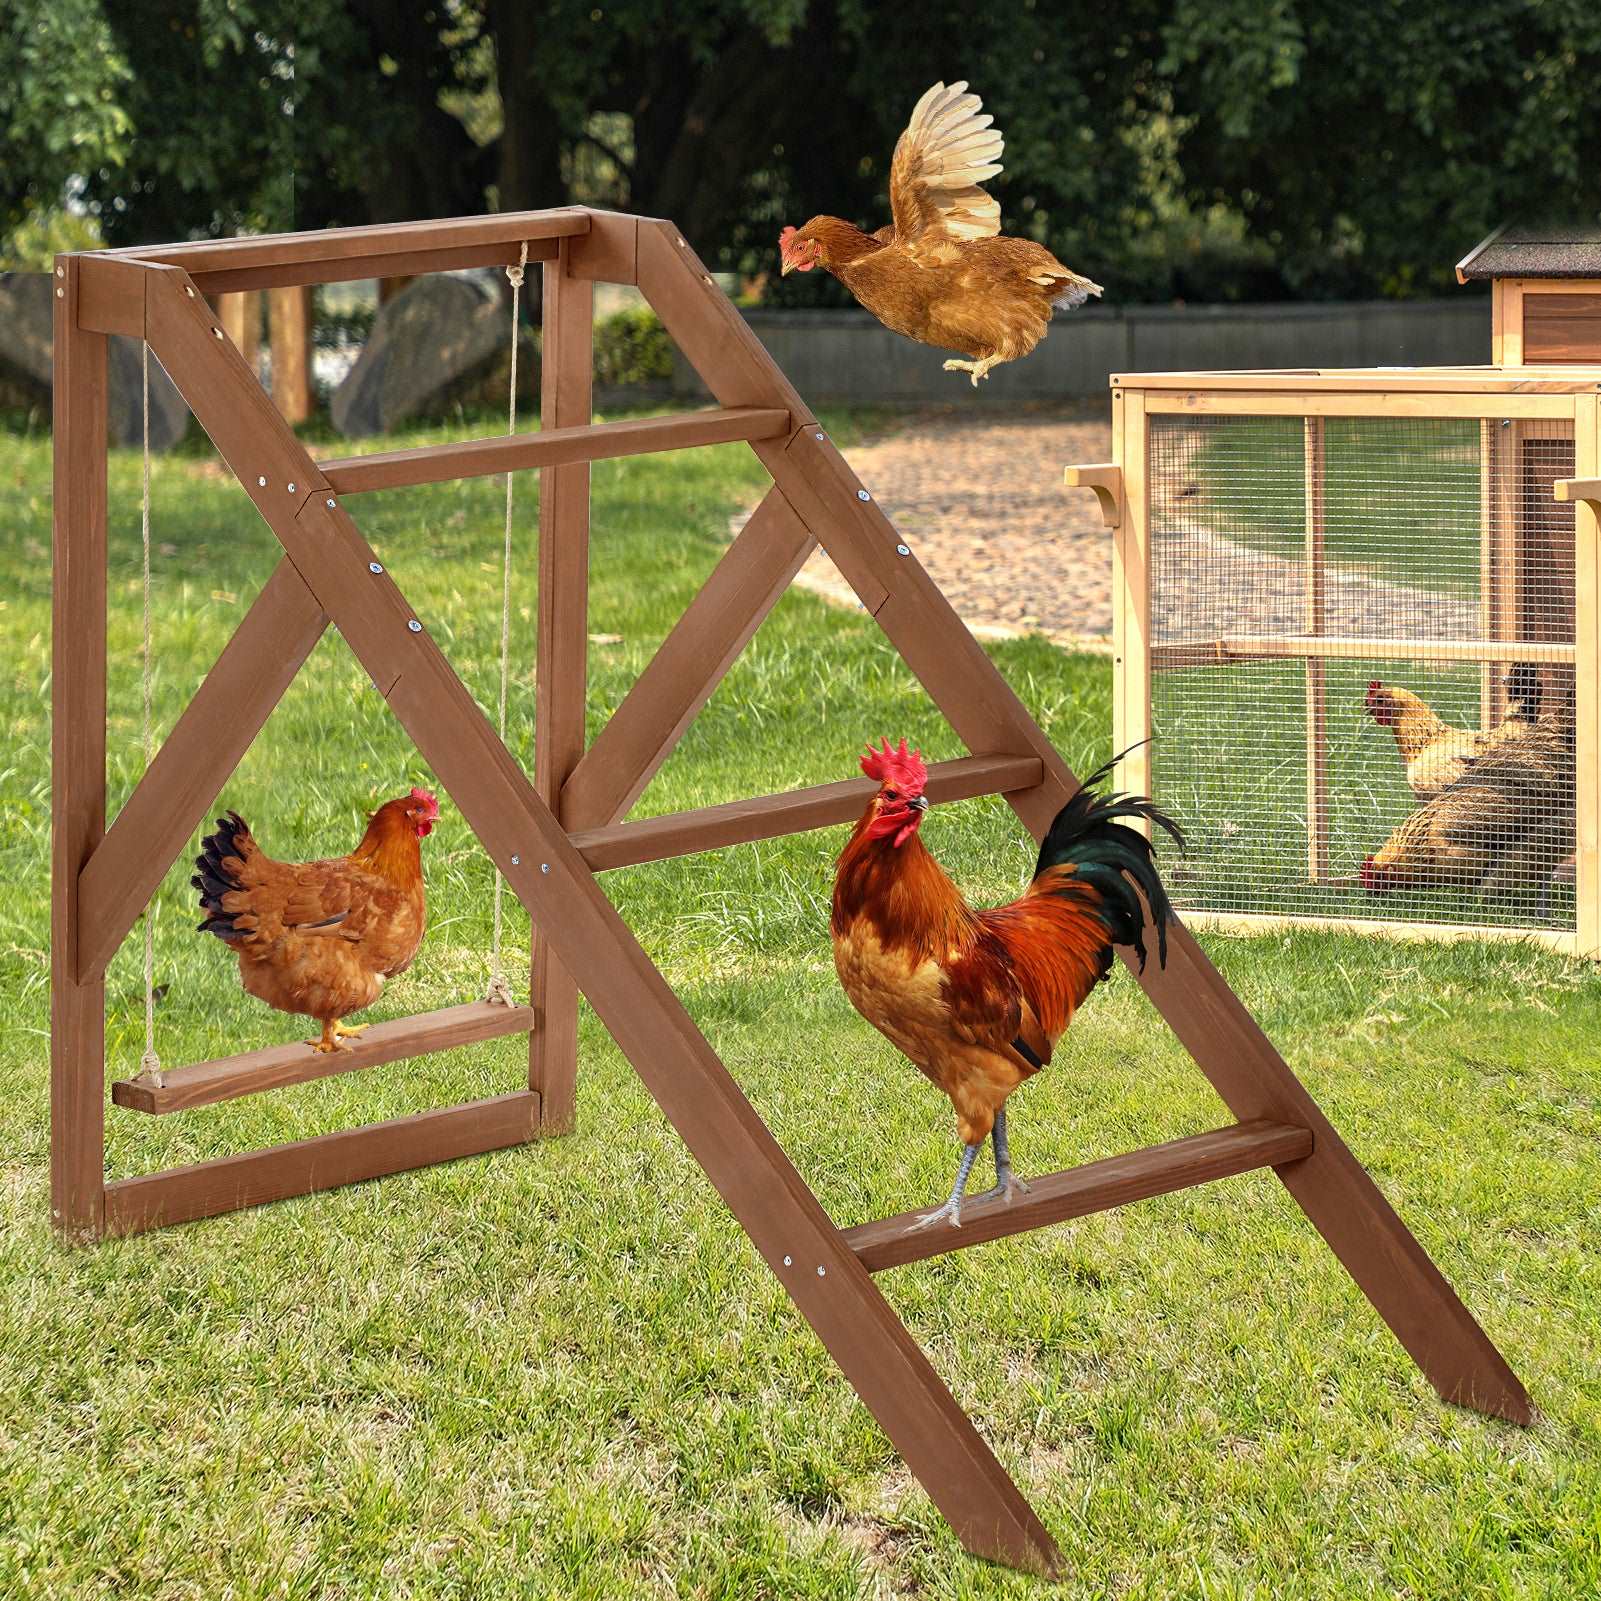 petsfit-chicken-swing-set-for-pets-healthy-happy-4-chicken-perches-with-swing-fit-for-8-10-chicks-chicken-toys-for-coop-accessories-05